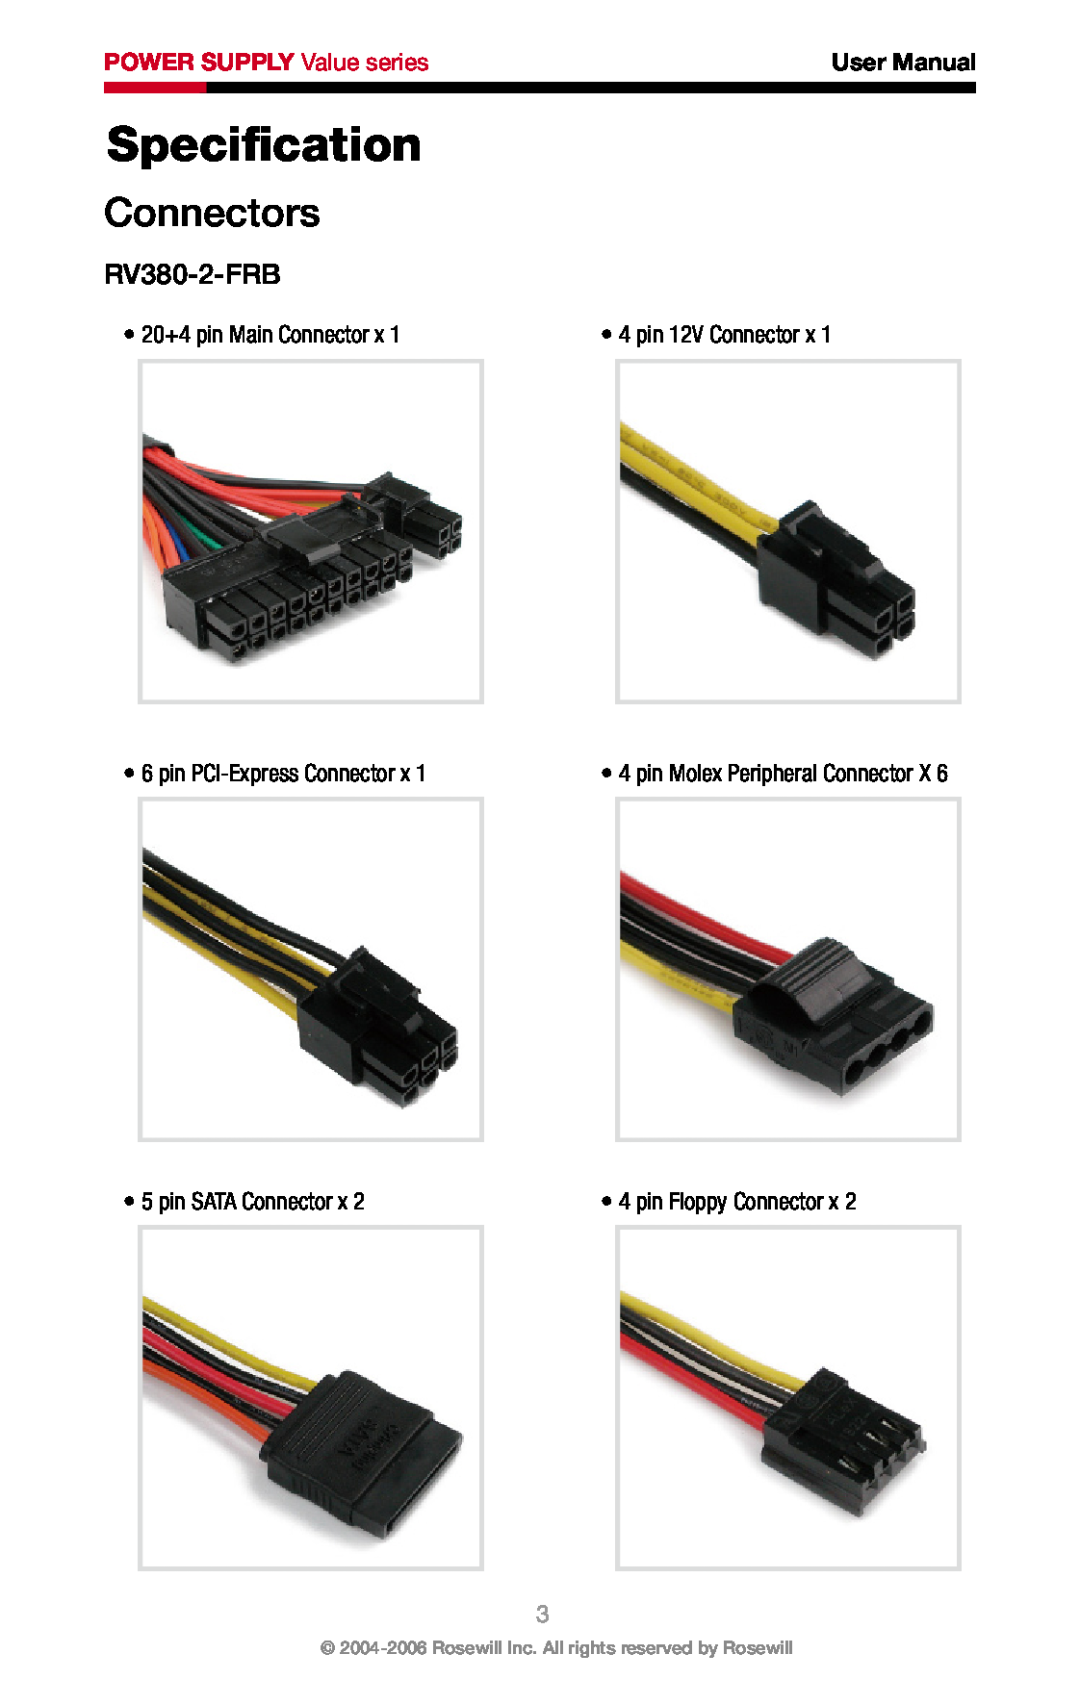 Rosewill RV-380-2-FRB Speciﬁcation, Connectors, RV380-2-FRB, 20+4 pin Main Connector x, pin 12V Connector x, User Manual 